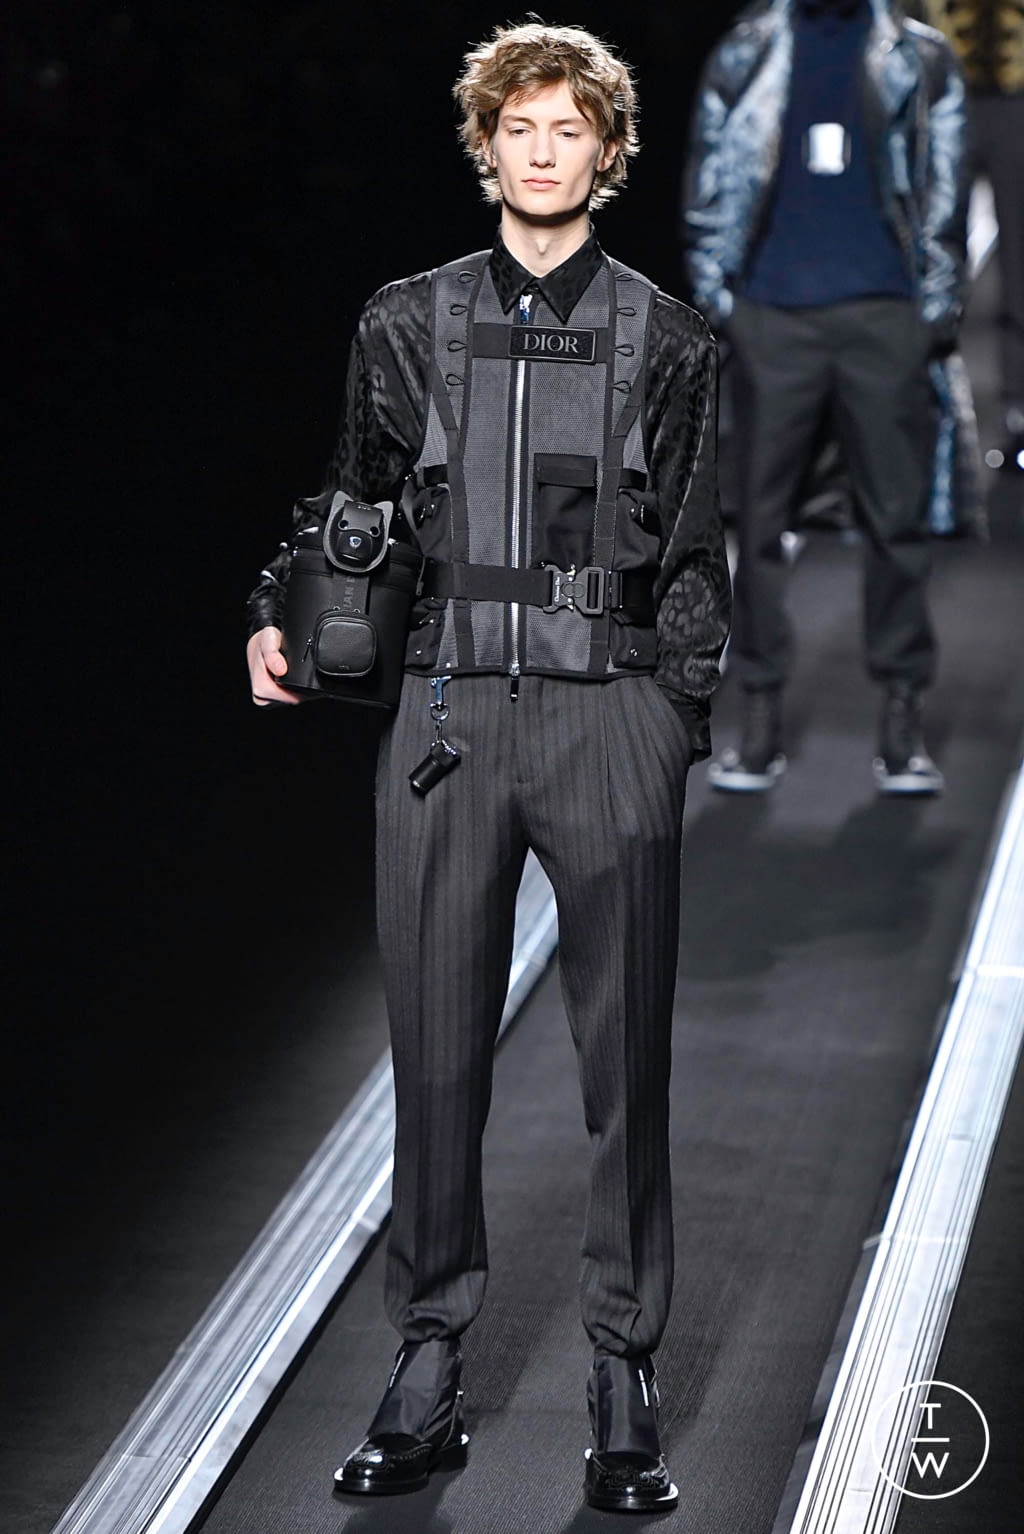 Dior Homme FW19 menswear #22 - The 